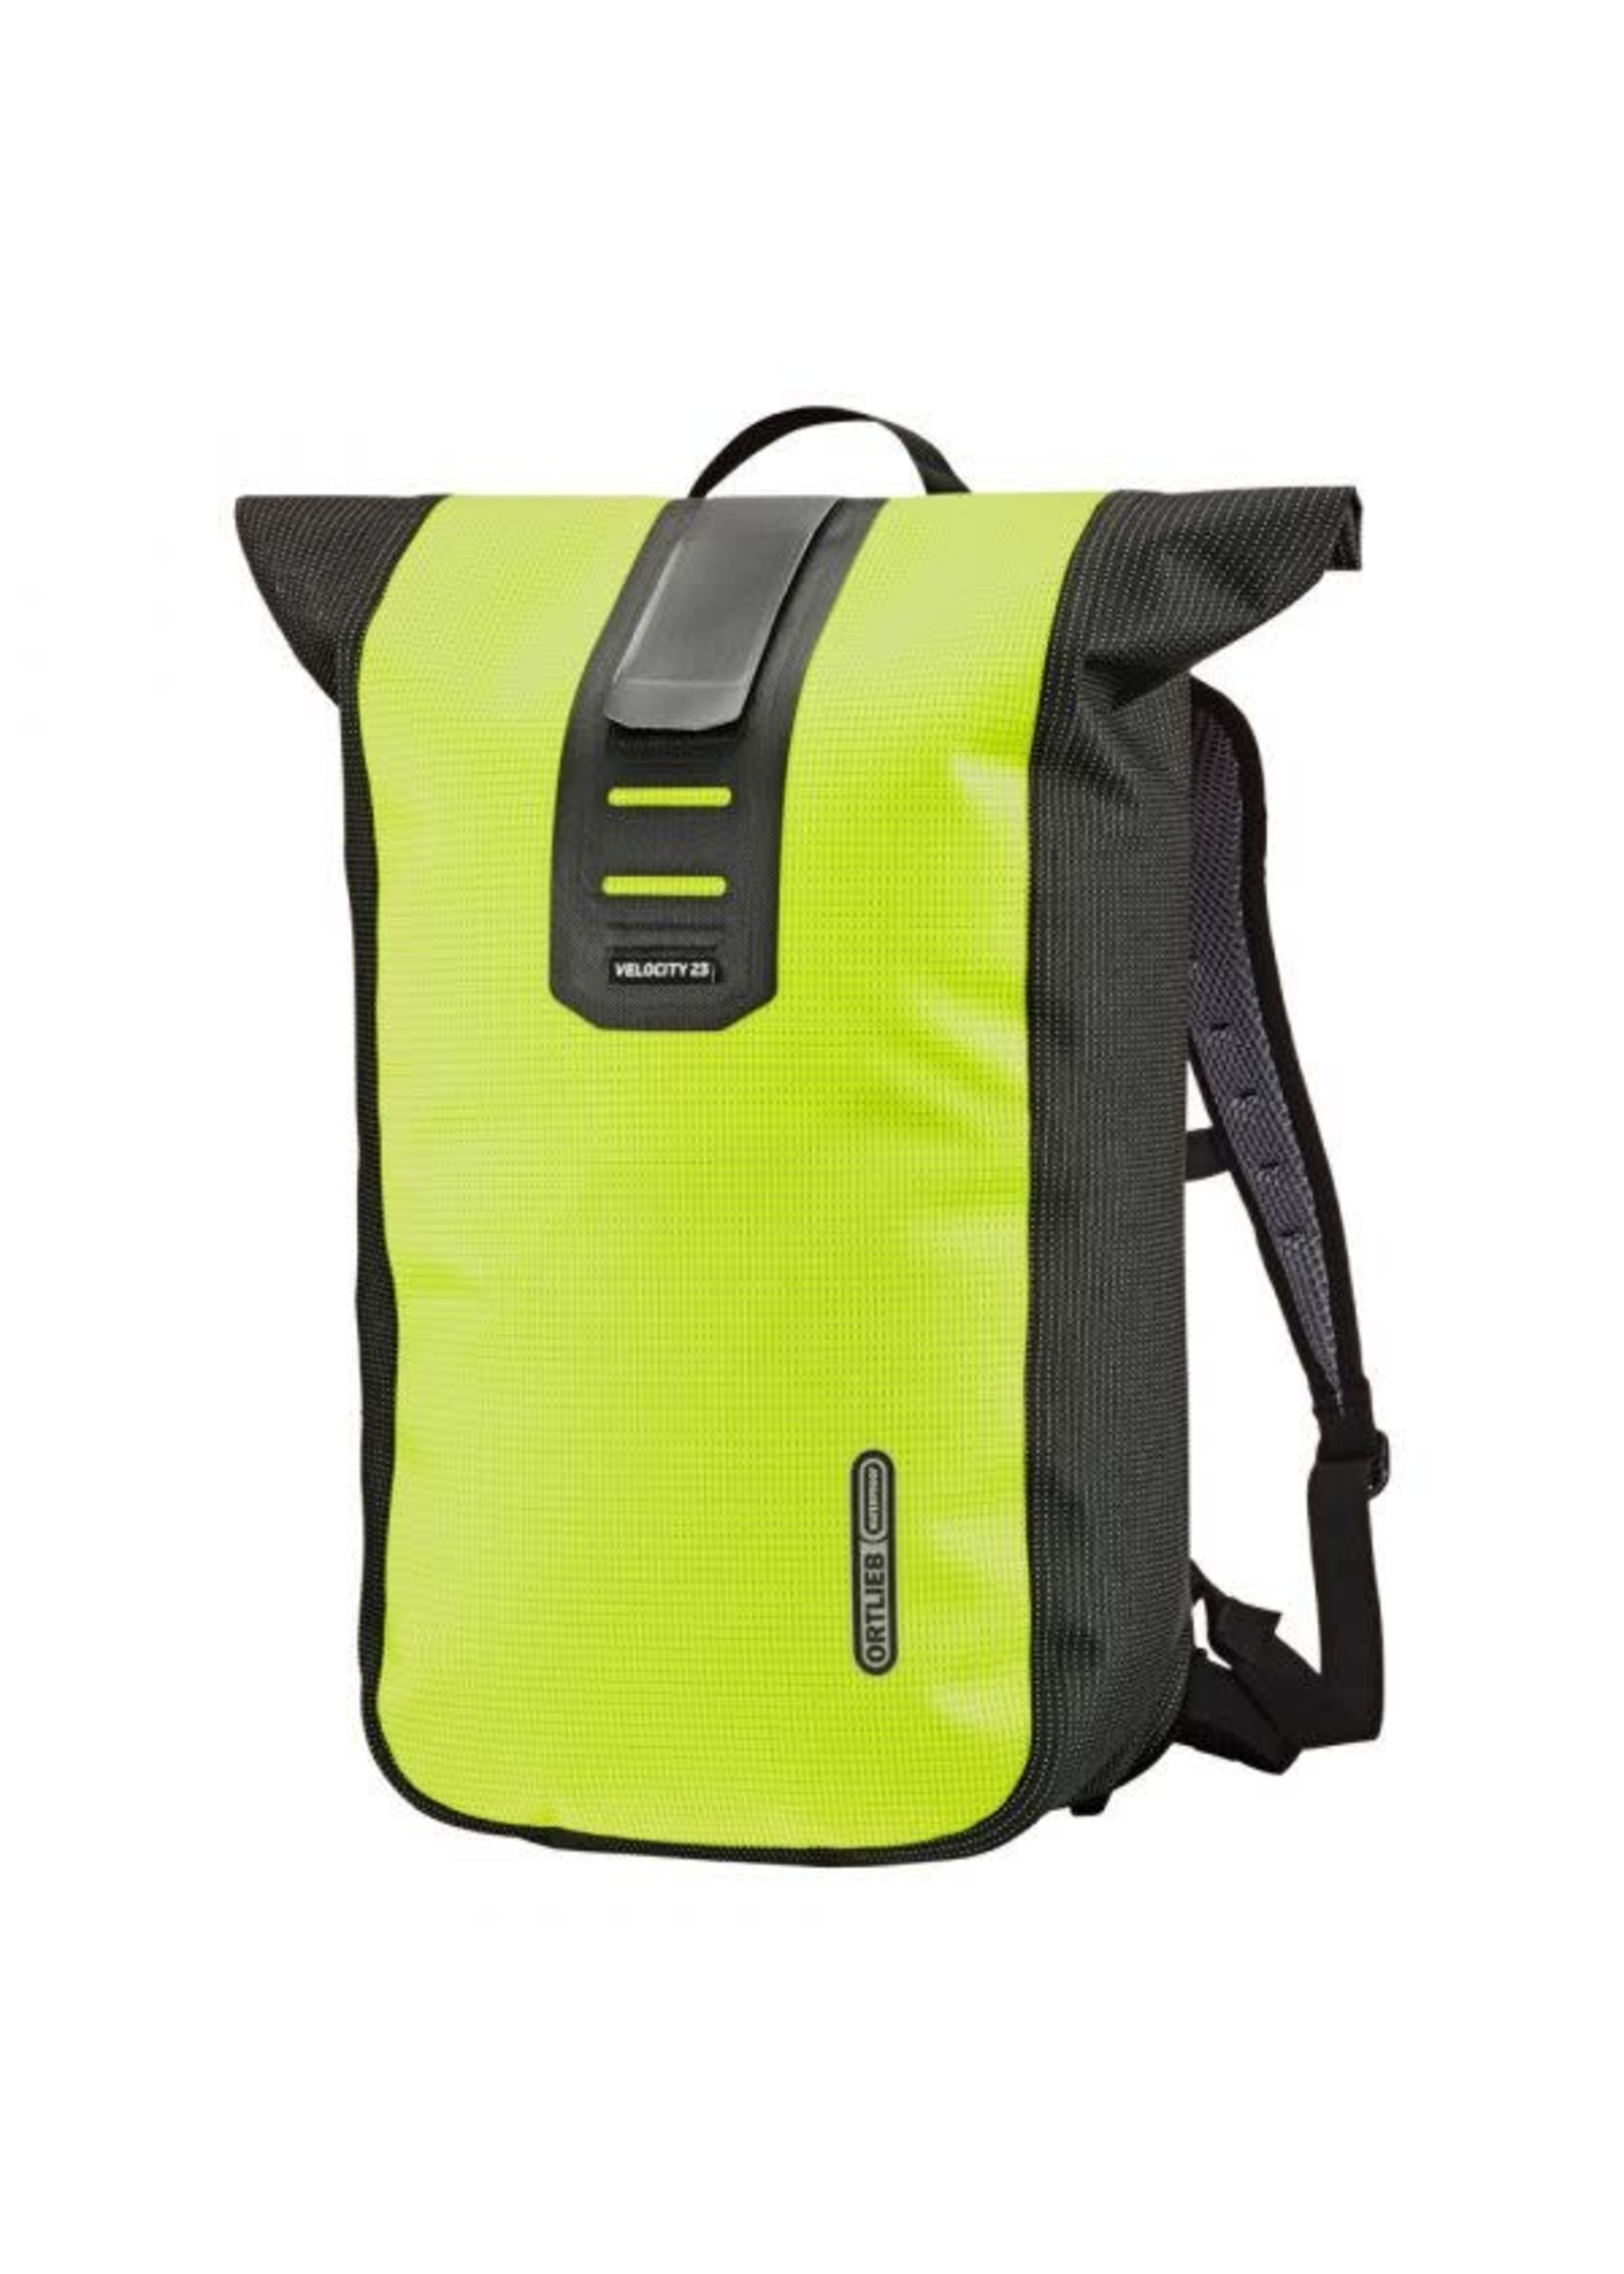 Ortlieb BACKPACK VELOCITY HIGH VISIBILITY YELLOW/BLACK REFELCTIVE 23L